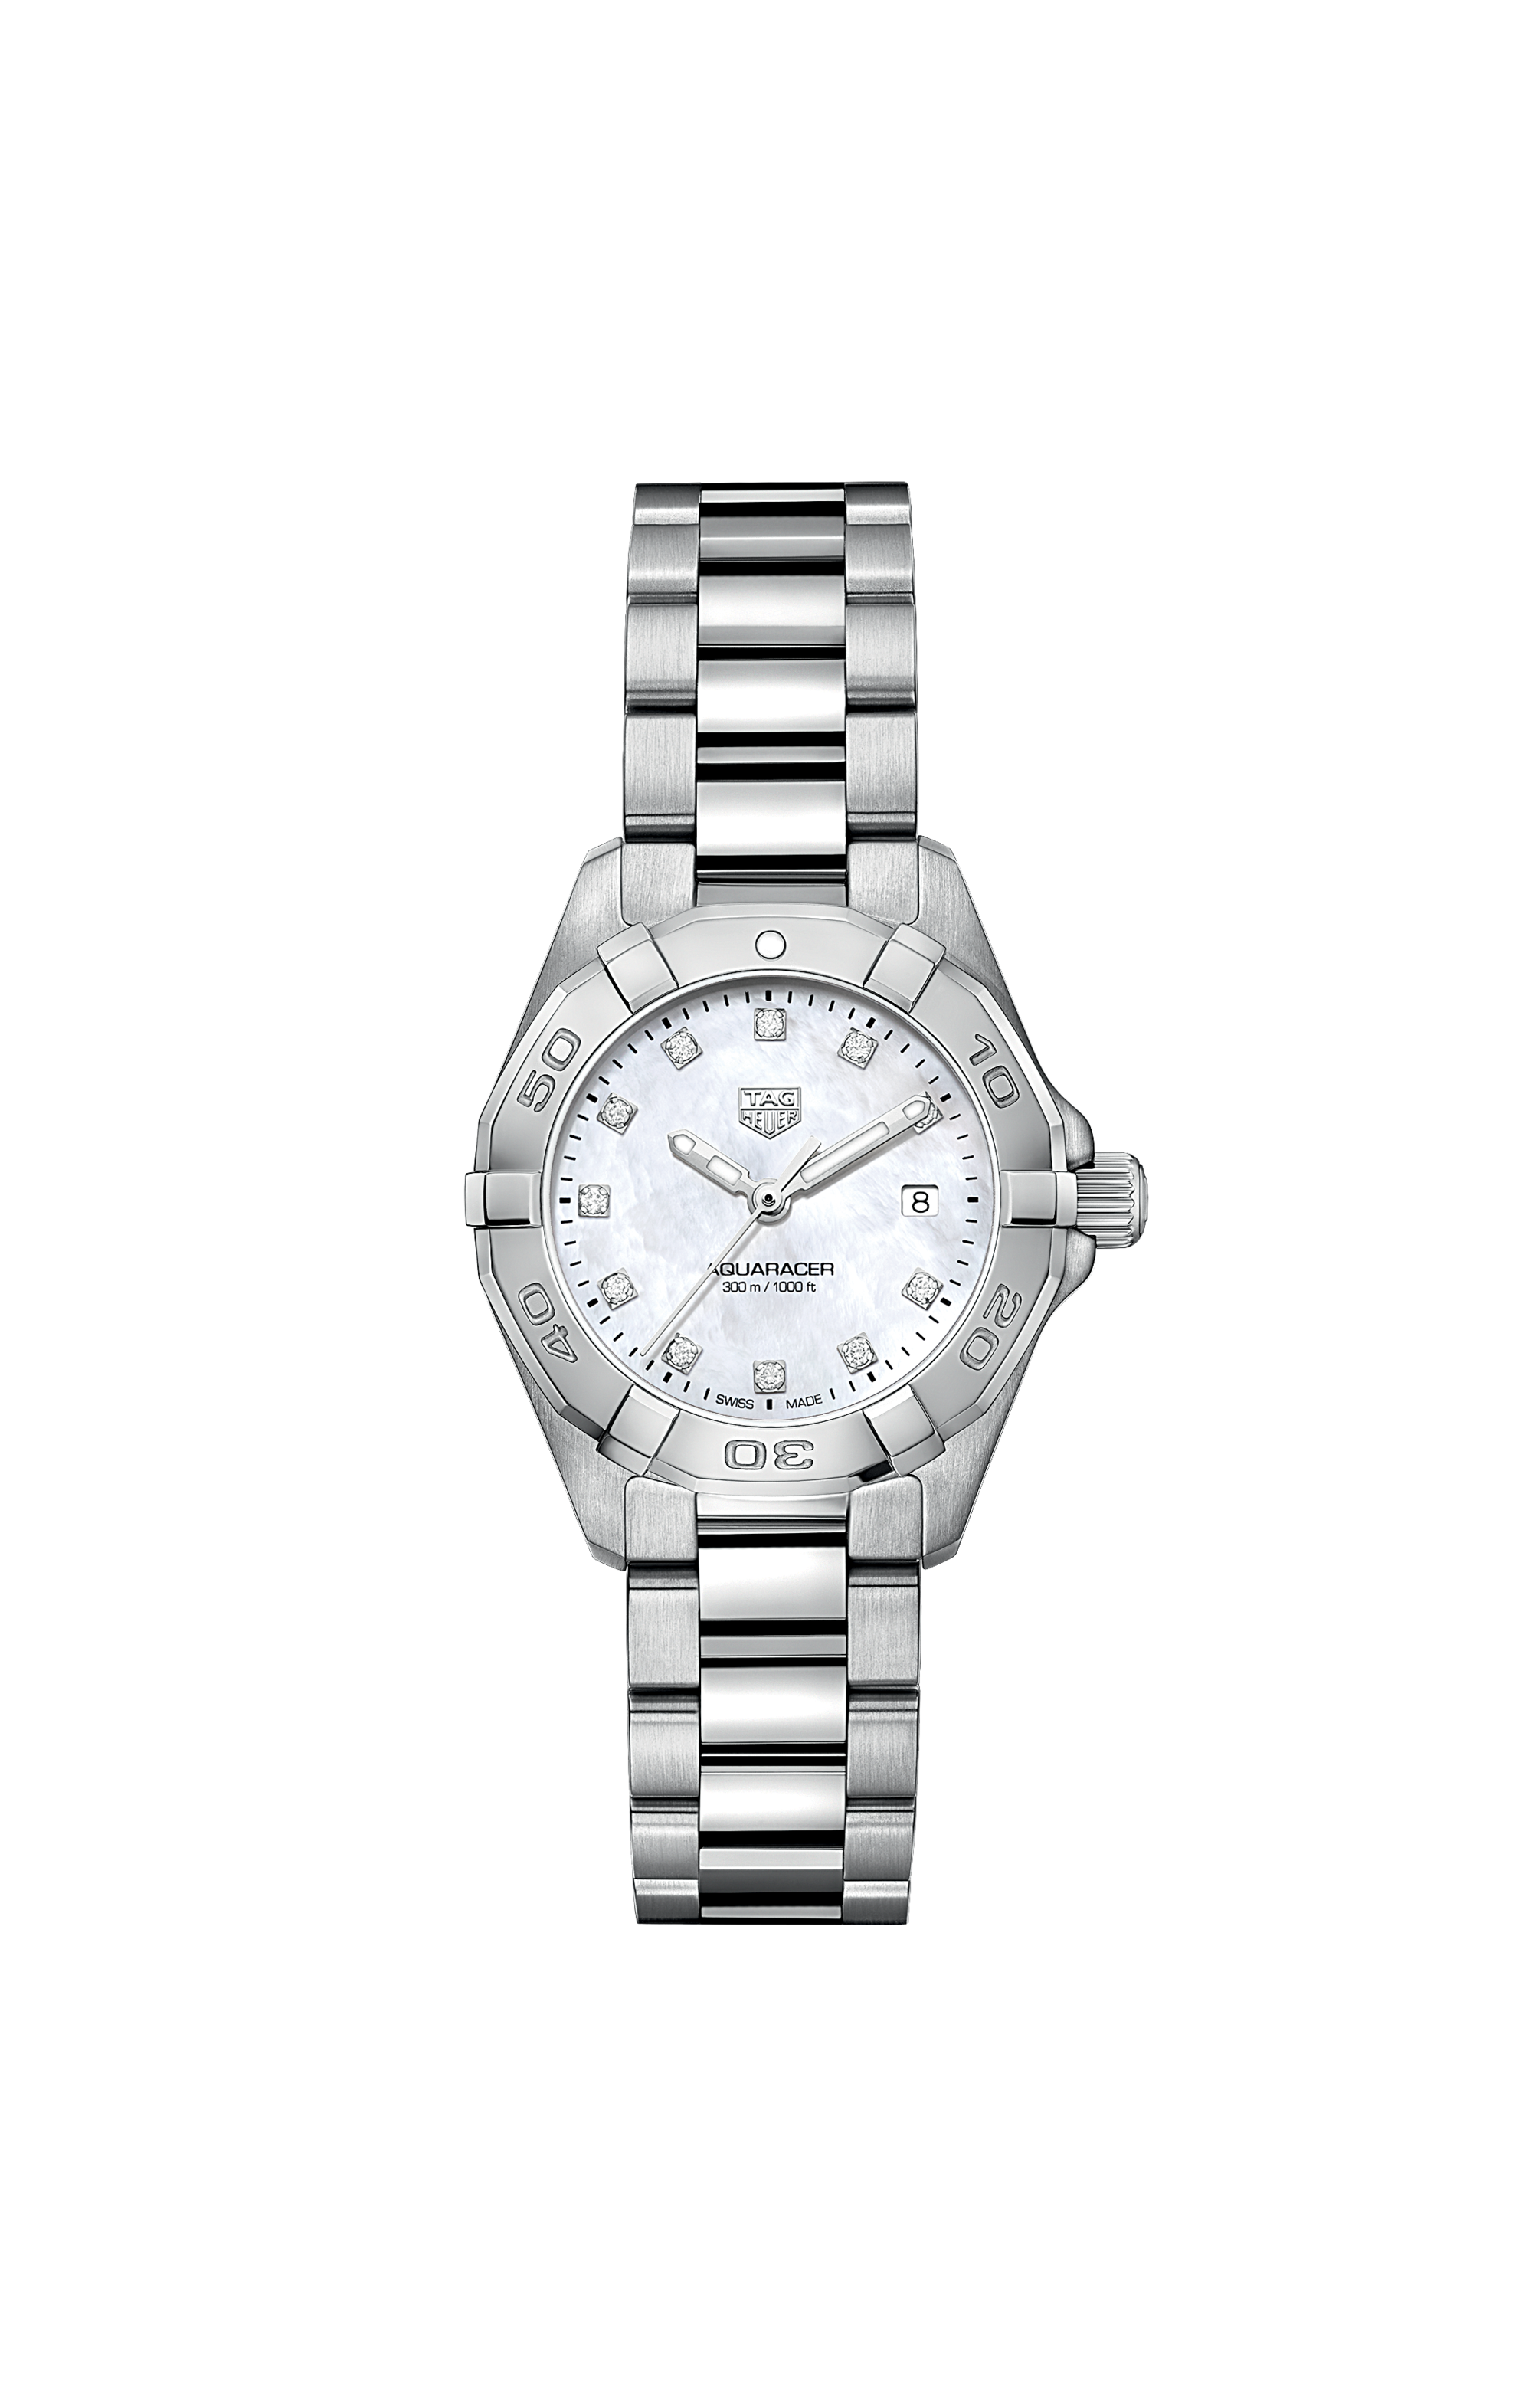 TAG Heuer Aquaracer WBD2112 41mm Stainless Steel Mens WatchTAG Heuer Aquaracer WBD2112. BA0928